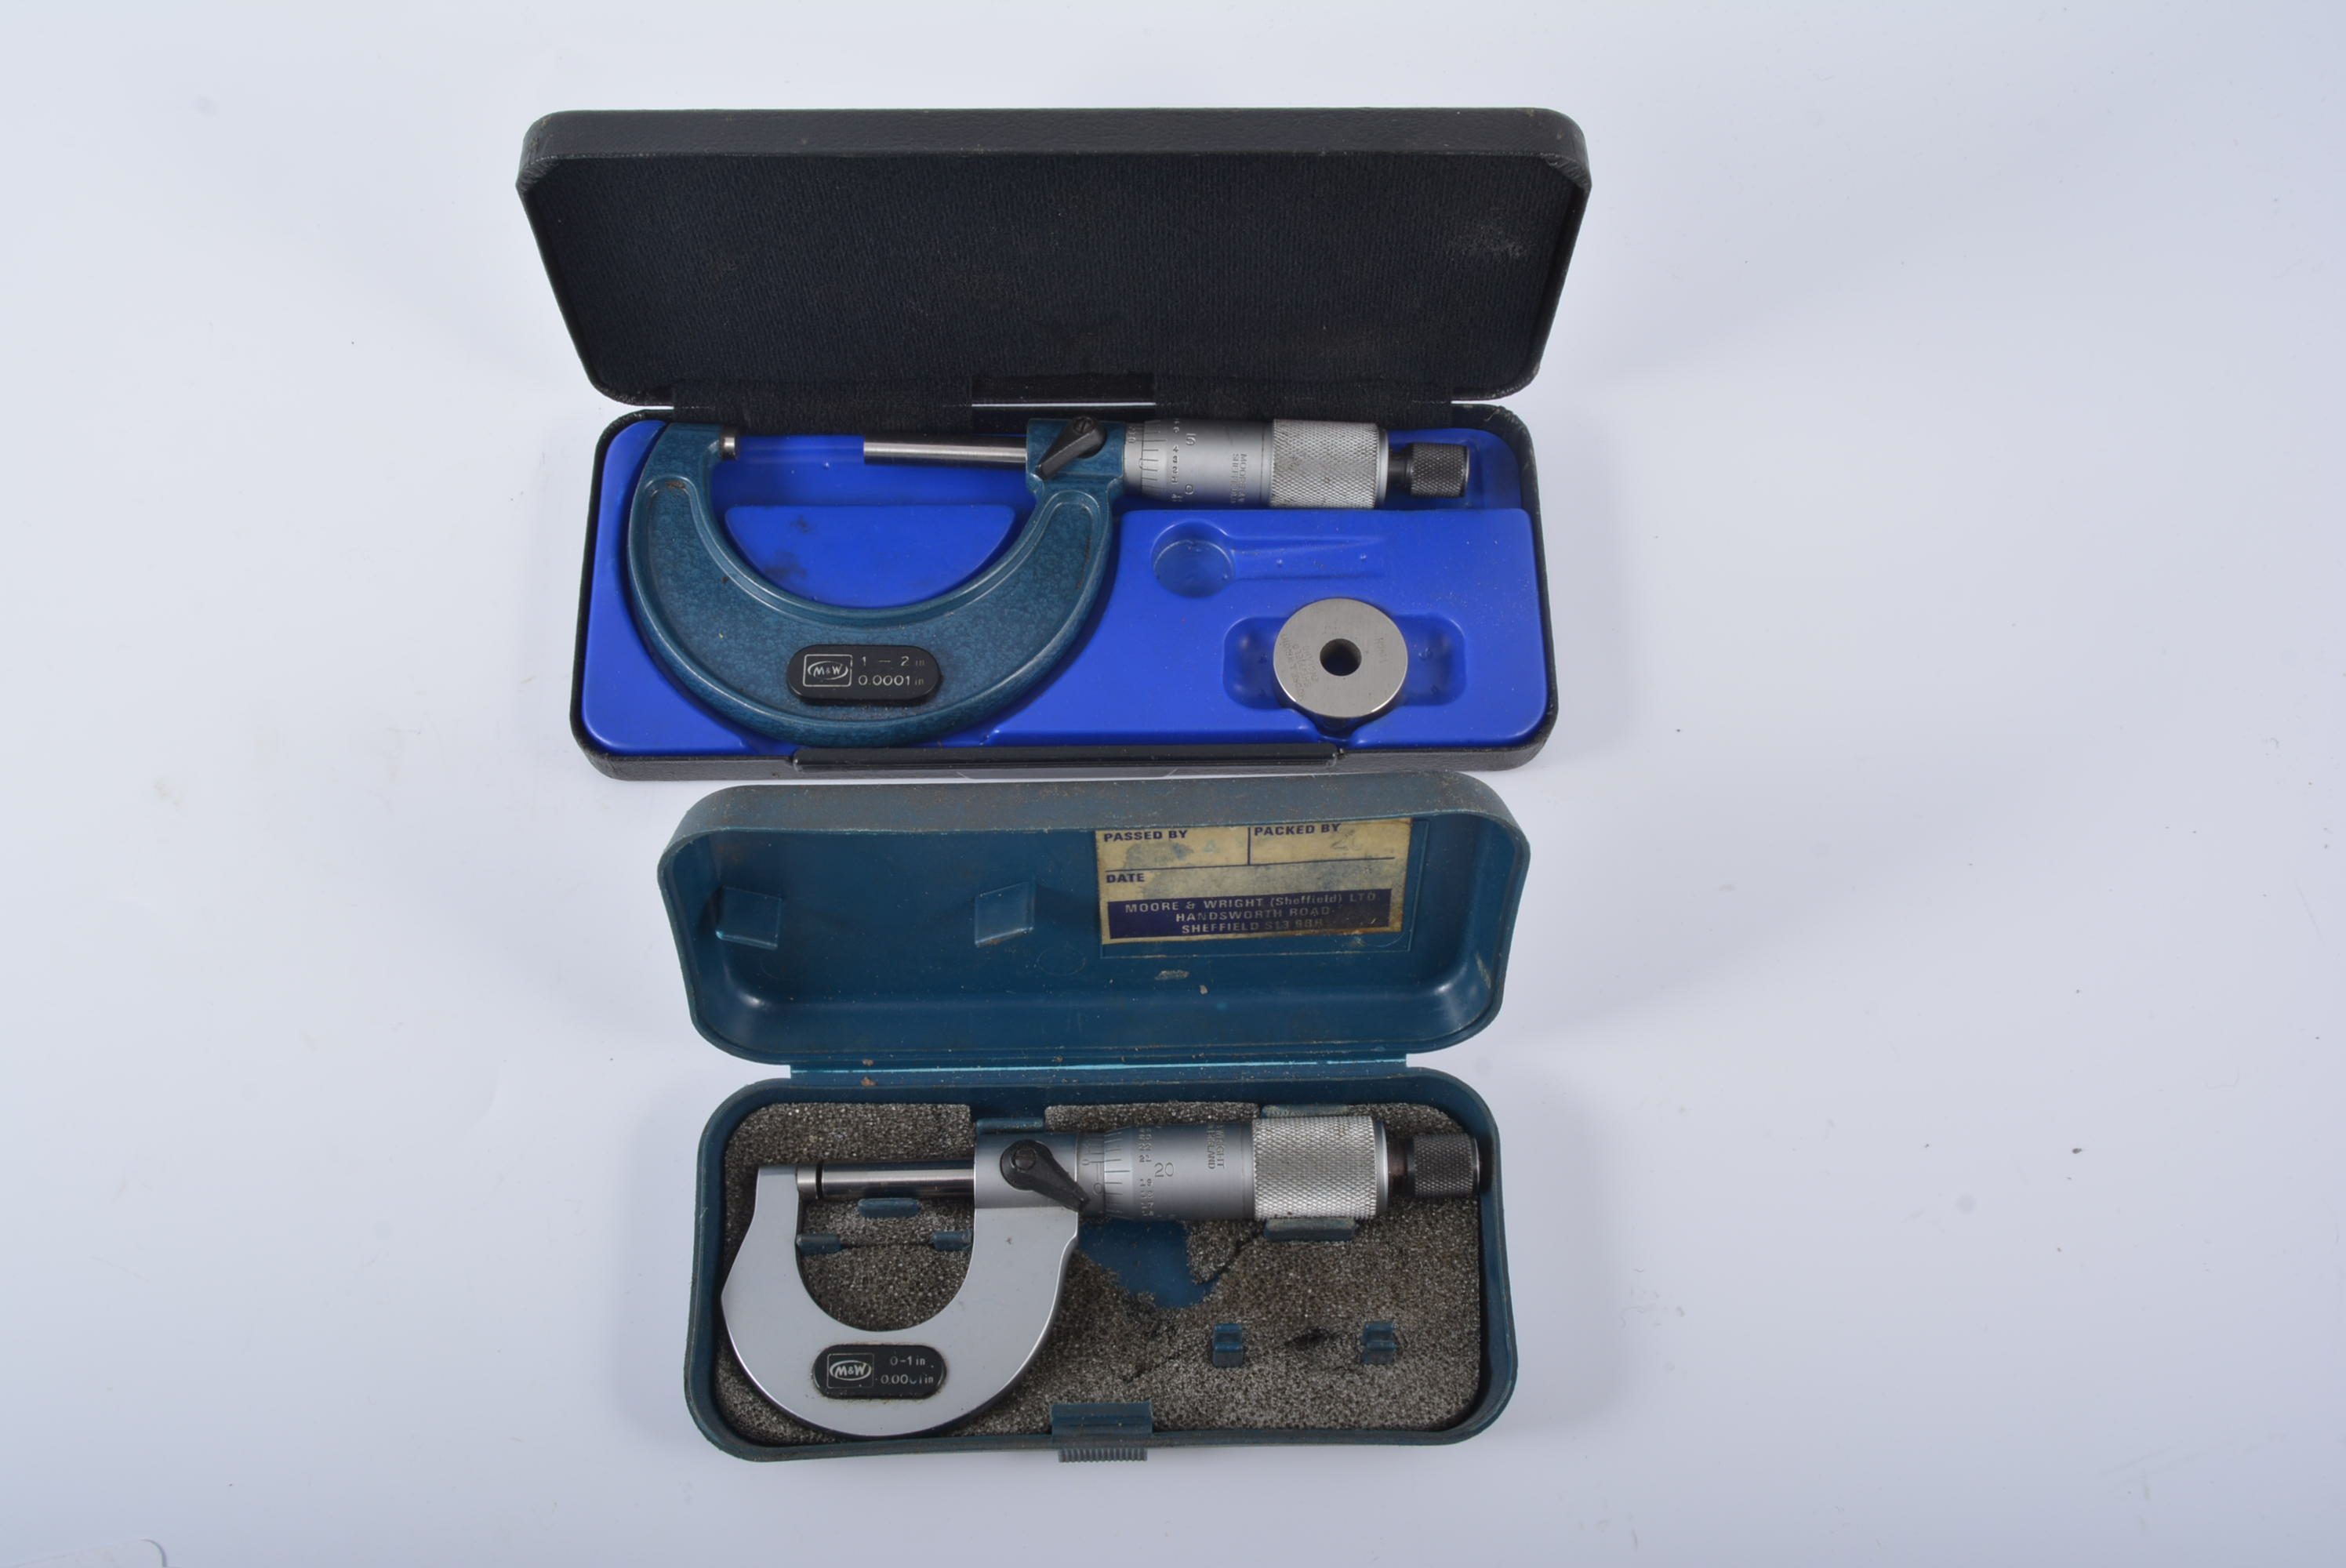 2 x MOORE & WRIGHT MICROMETERS 0-1 and 1-2 inch.